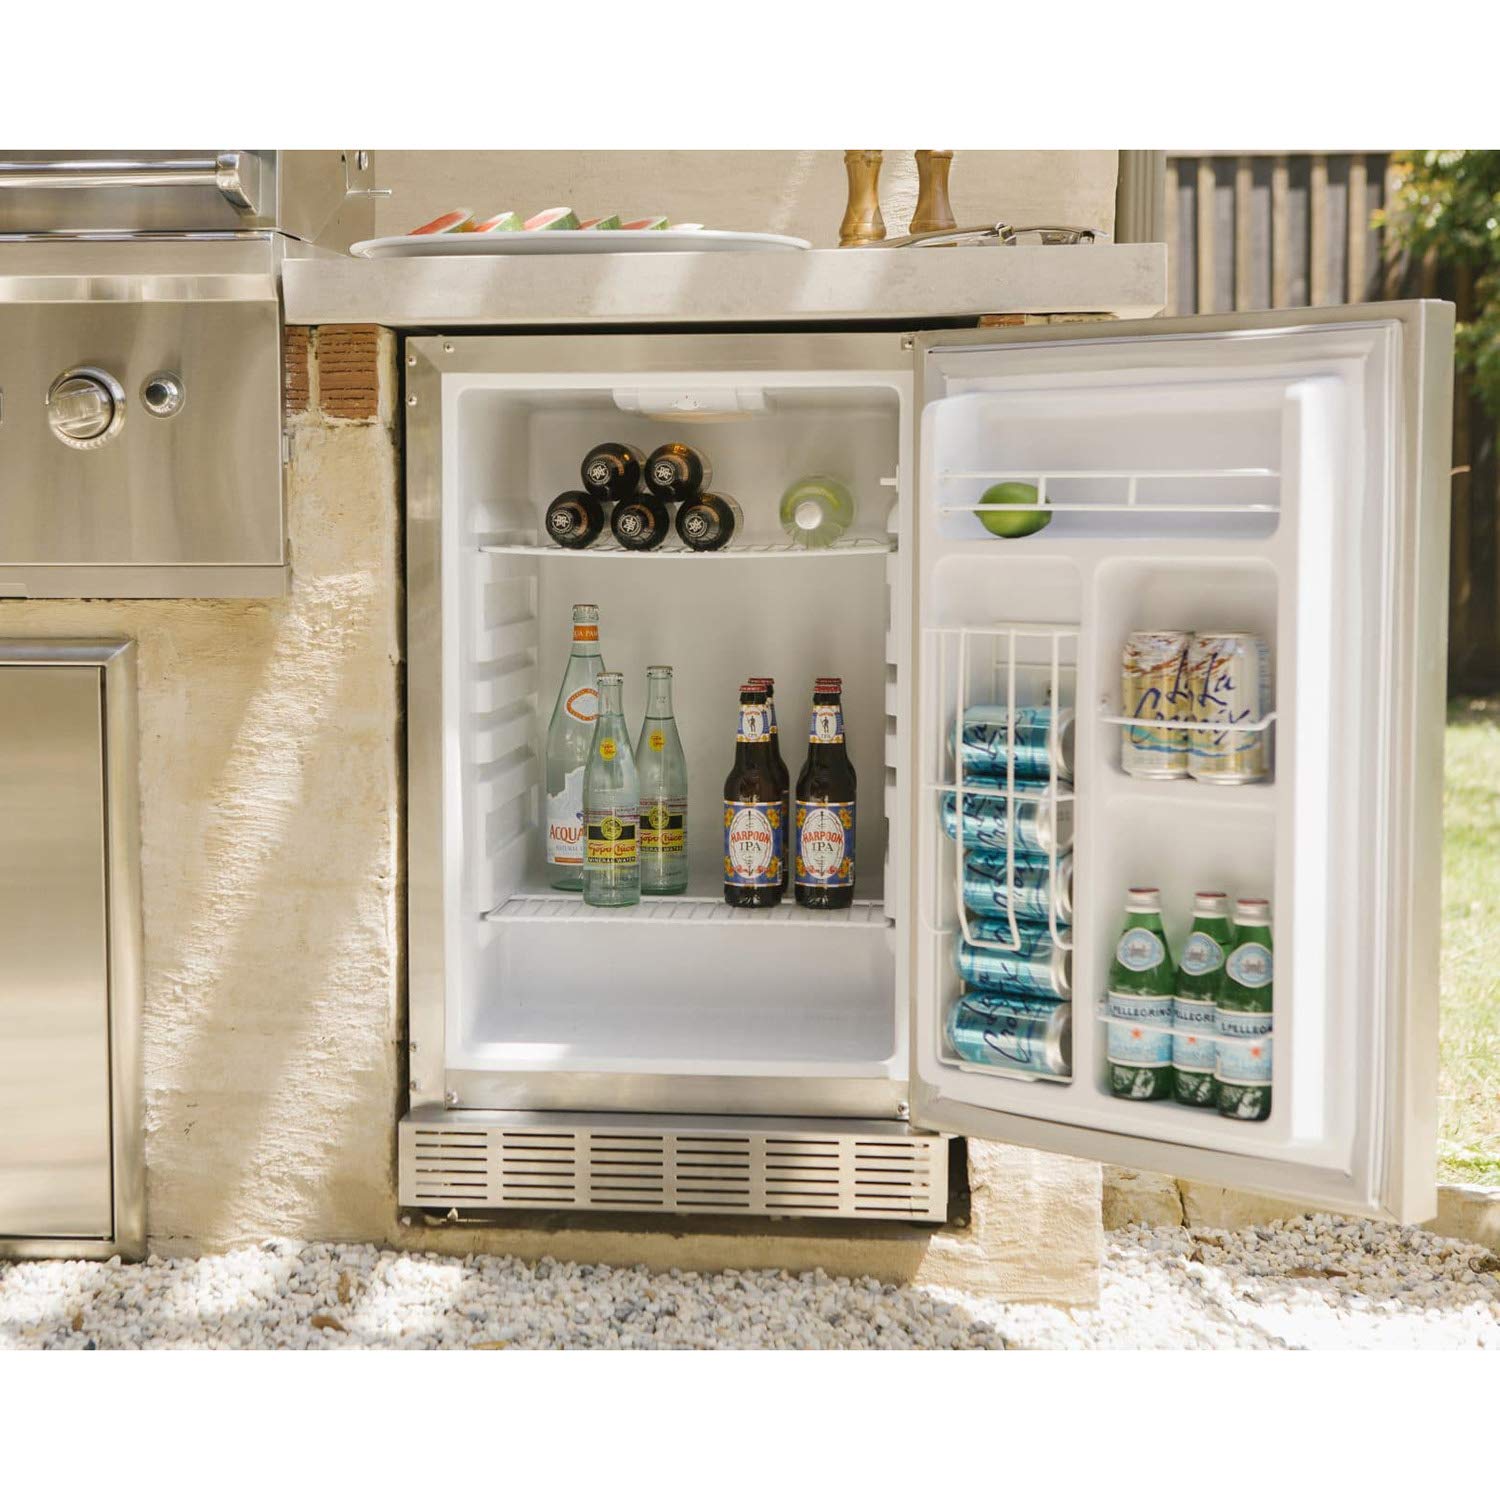 Coyote 21-Inch Outdoor Rated Compact Refrigerator, Left Hinge, 4.1 Cu. Ft., CBIR-L